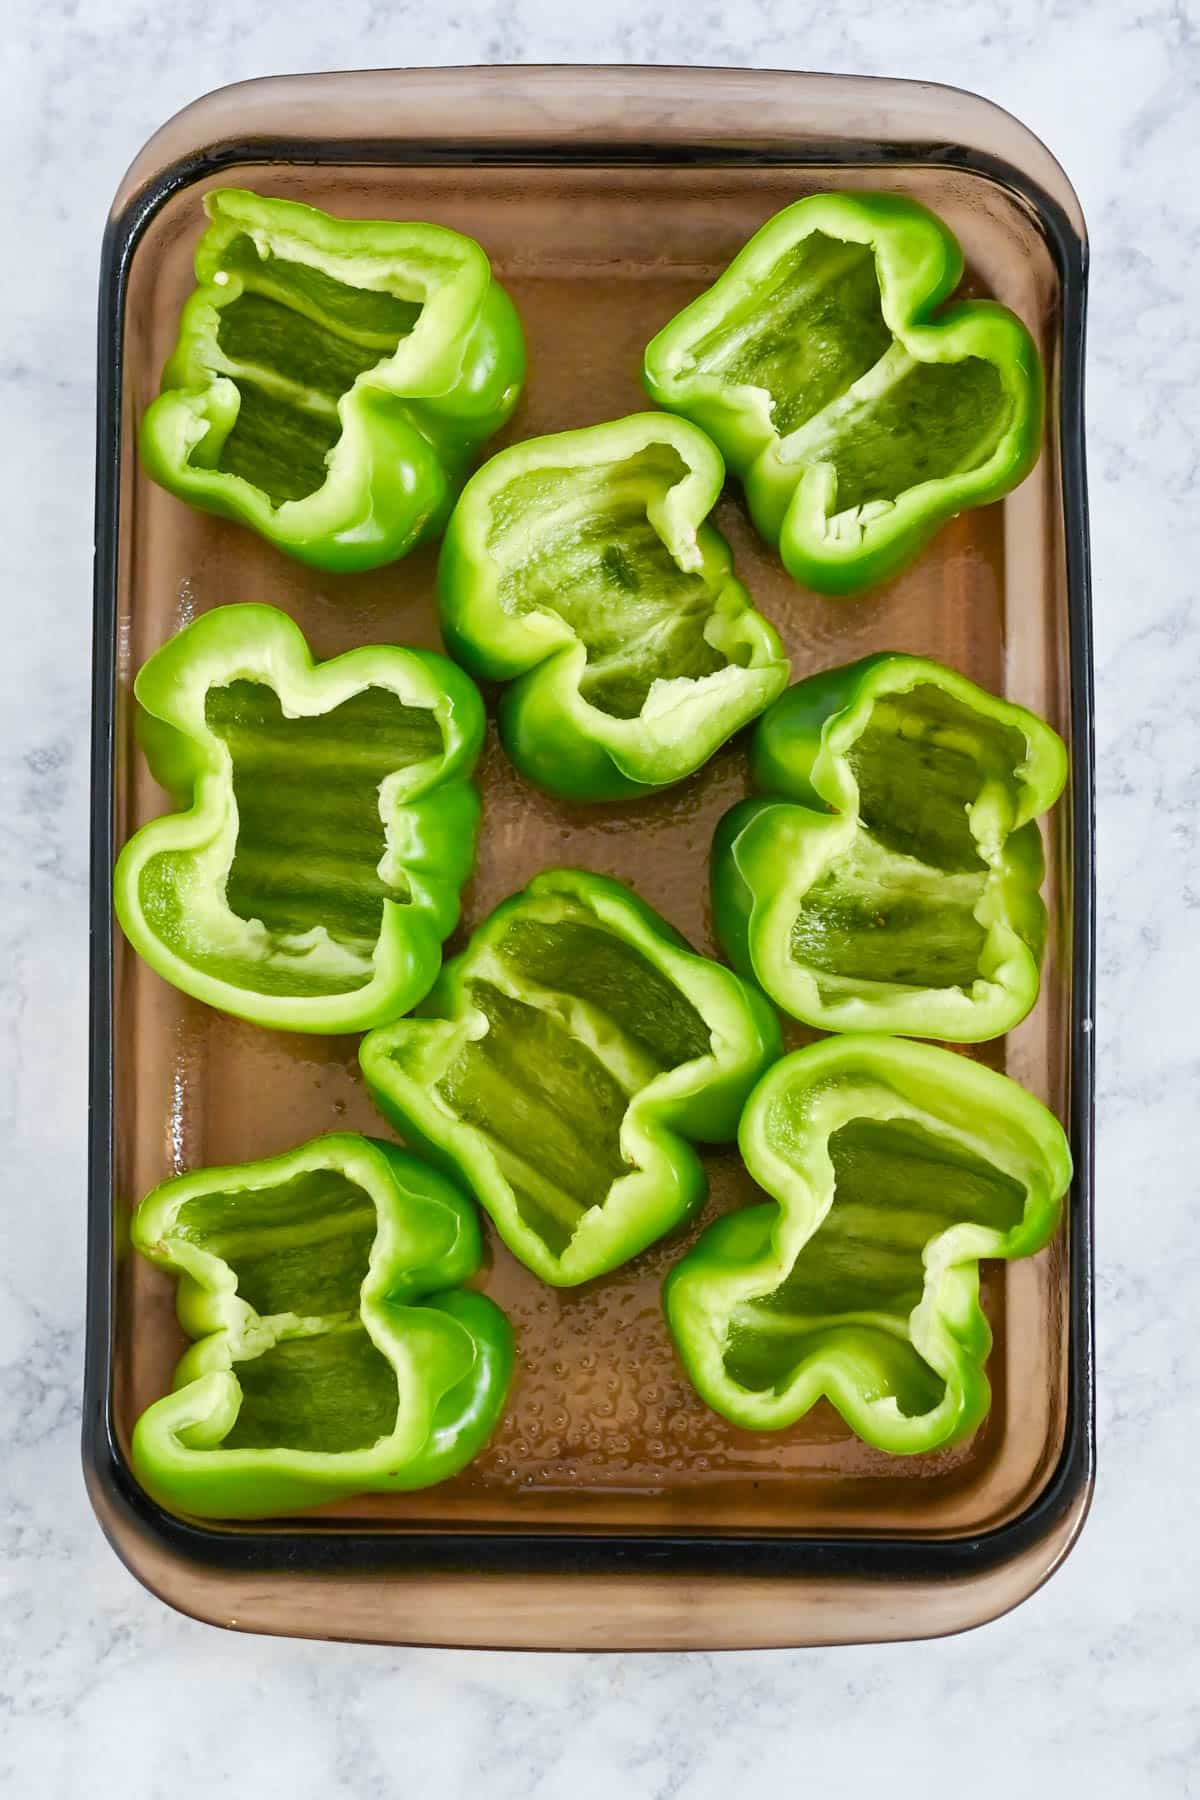 Casserole dish with eight green bell peppers cut in half, placed cut-side up on a marble counter.